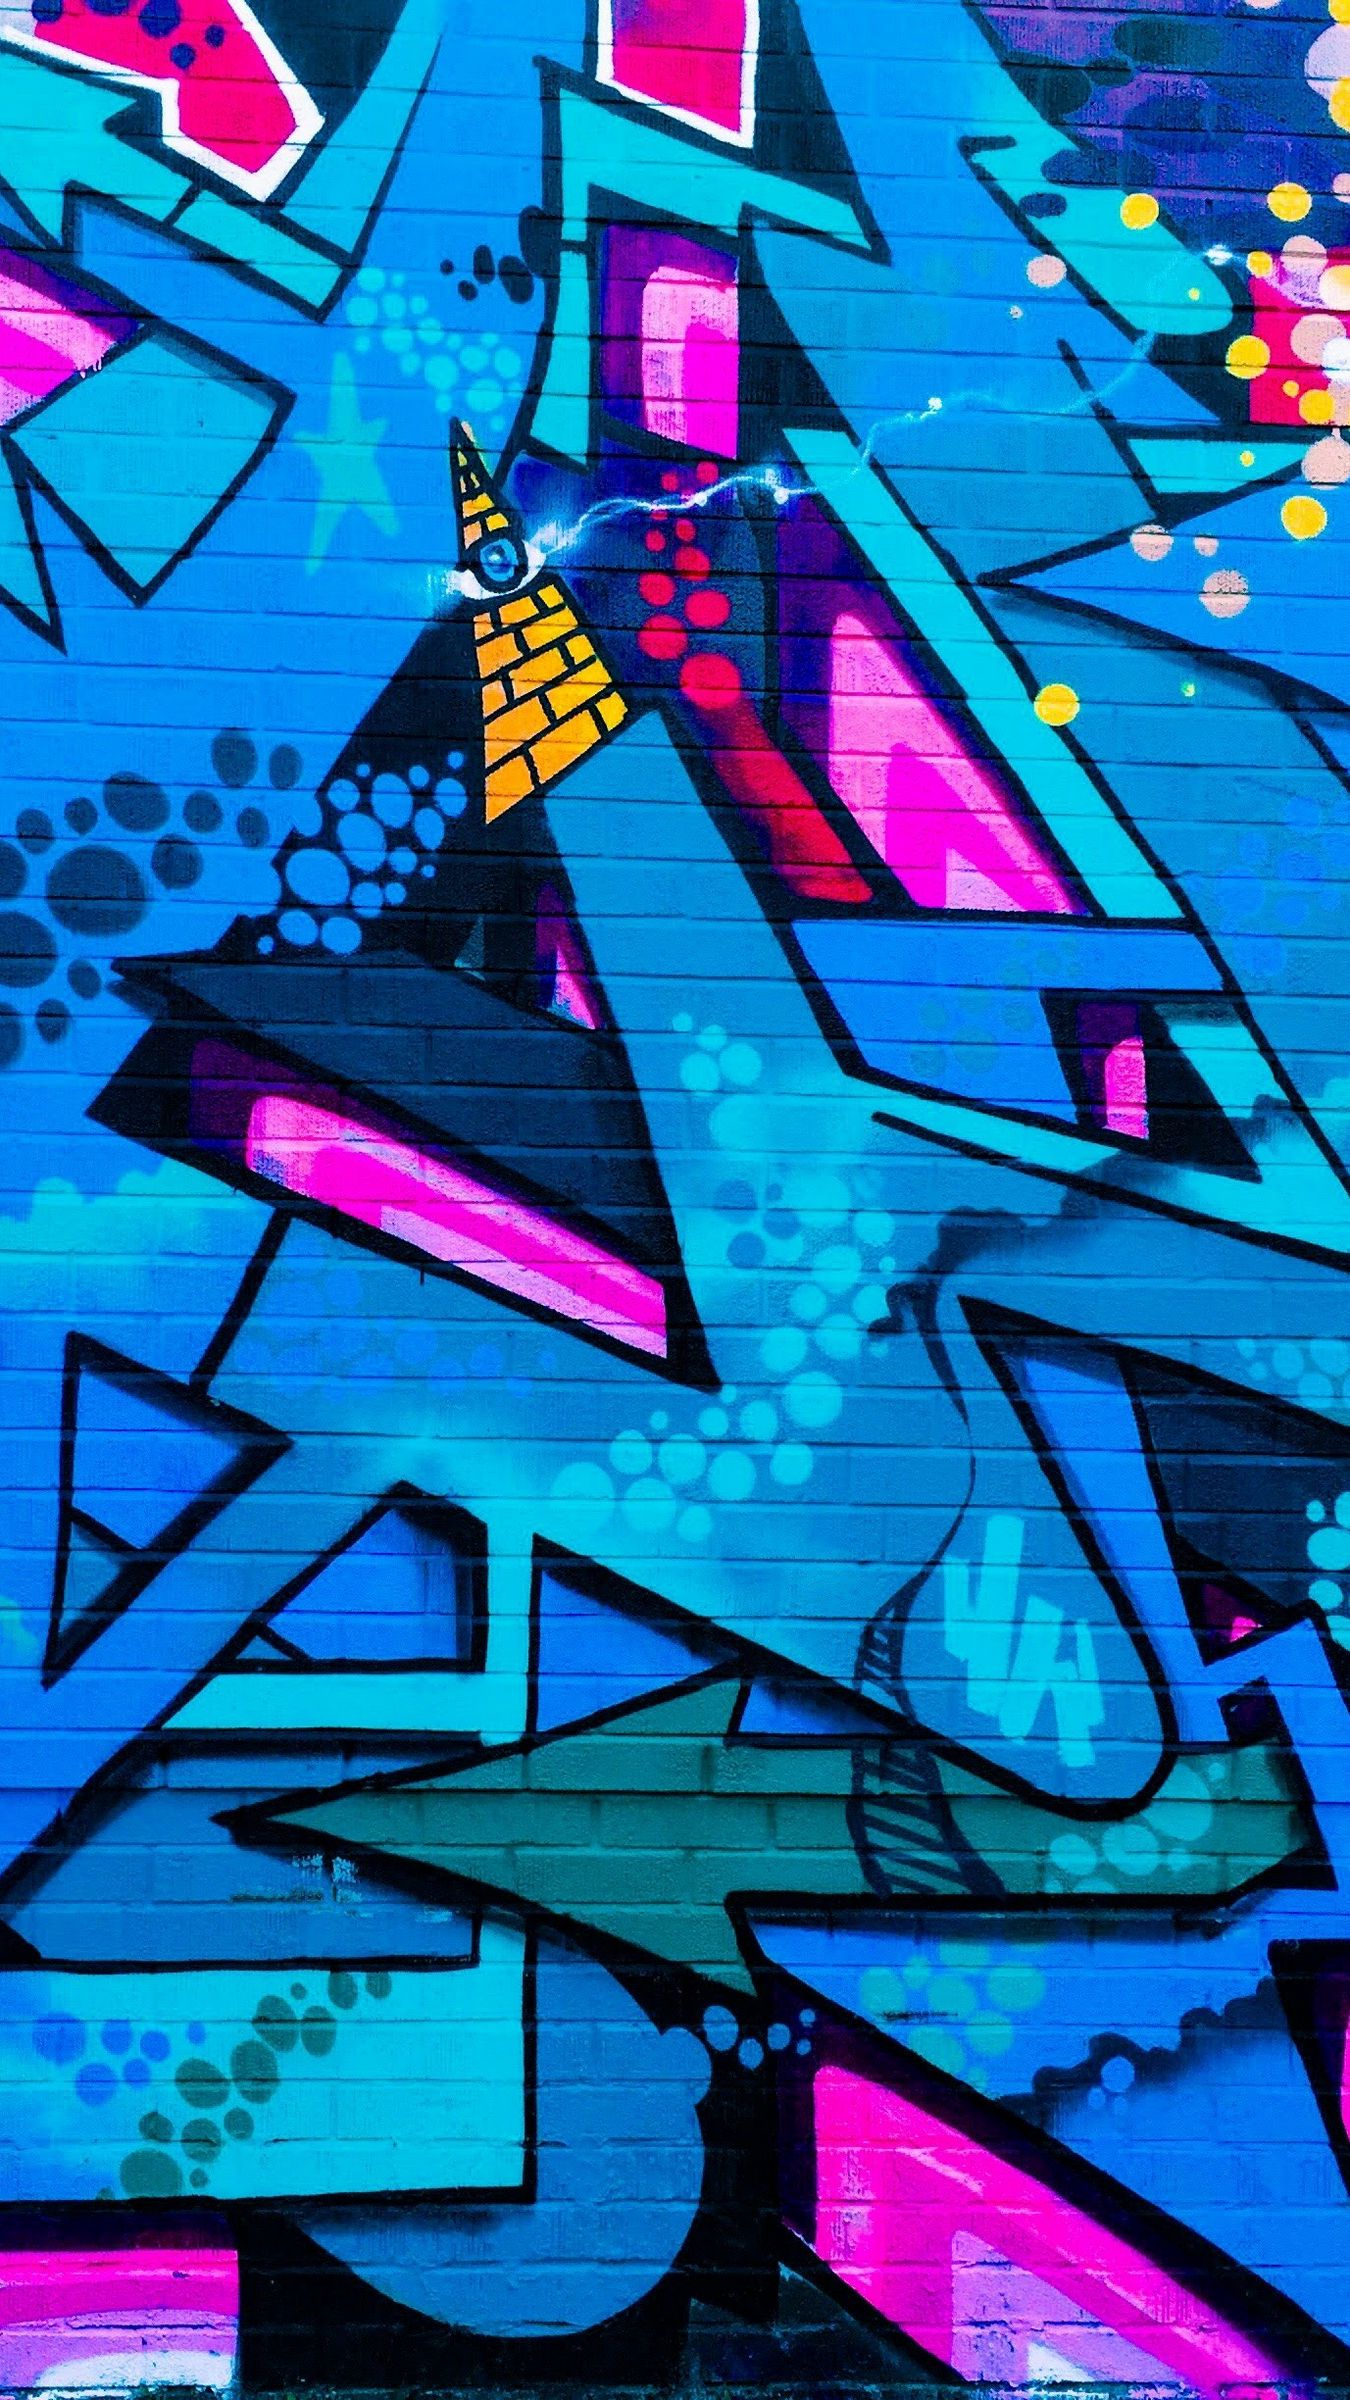 Download wallpaper 1350x2400 graffiti, street art, colorful, wall, urban  iphone 8+/7+/6s+/6+ for parallax hd background